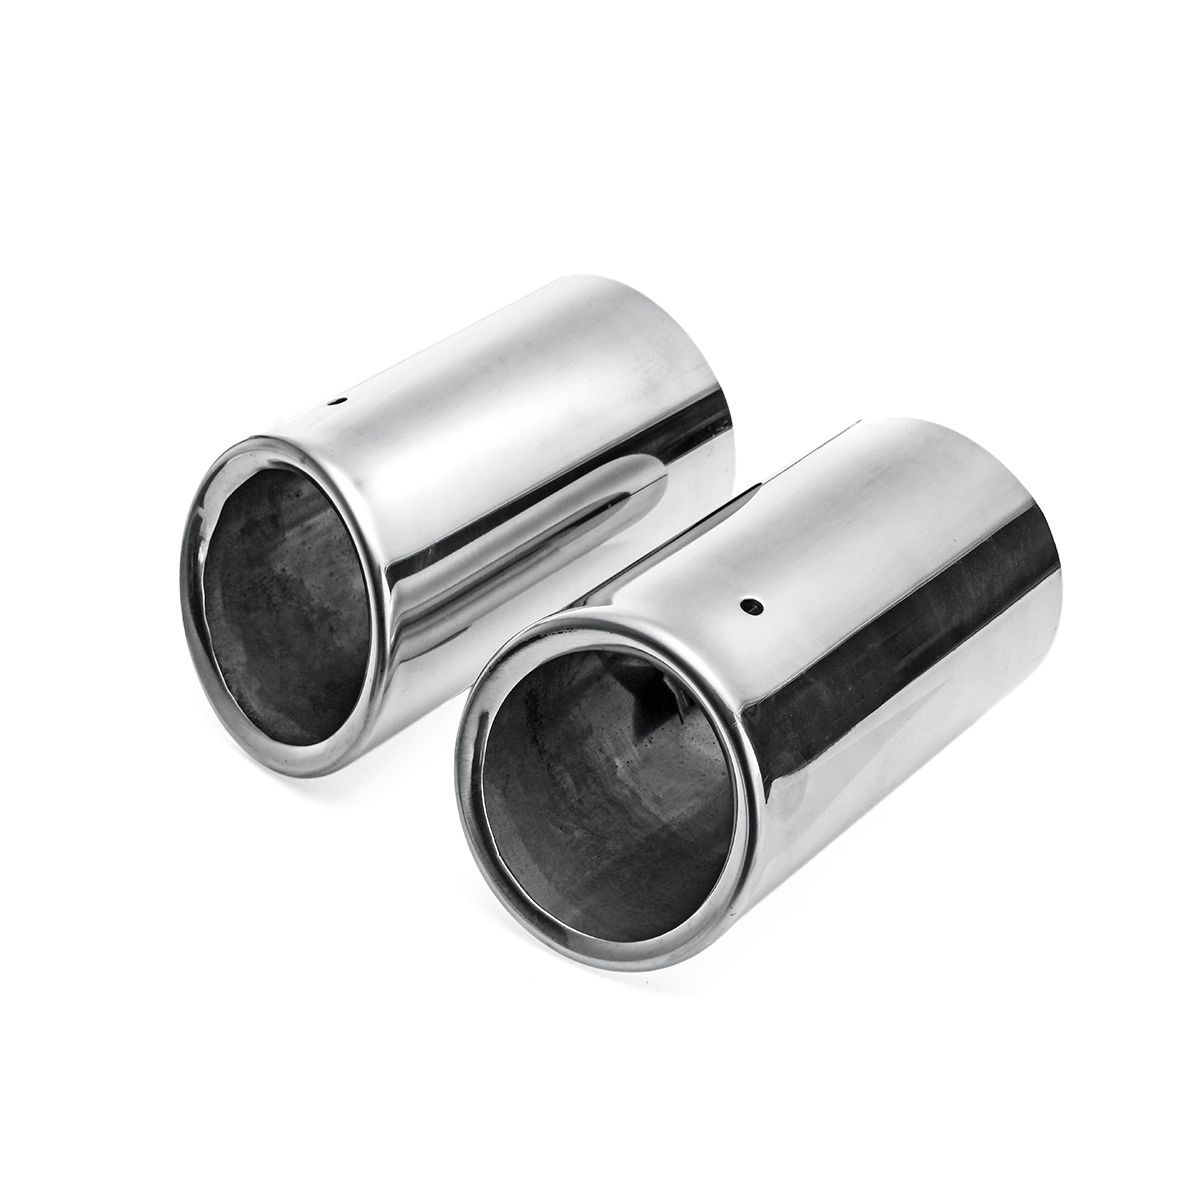 2PCS-Stainless-Steel-Exhaust-Pipe-Muffler-Tail-Tip-Pipe-For-Jaguar-XE-R-Sport-1701199